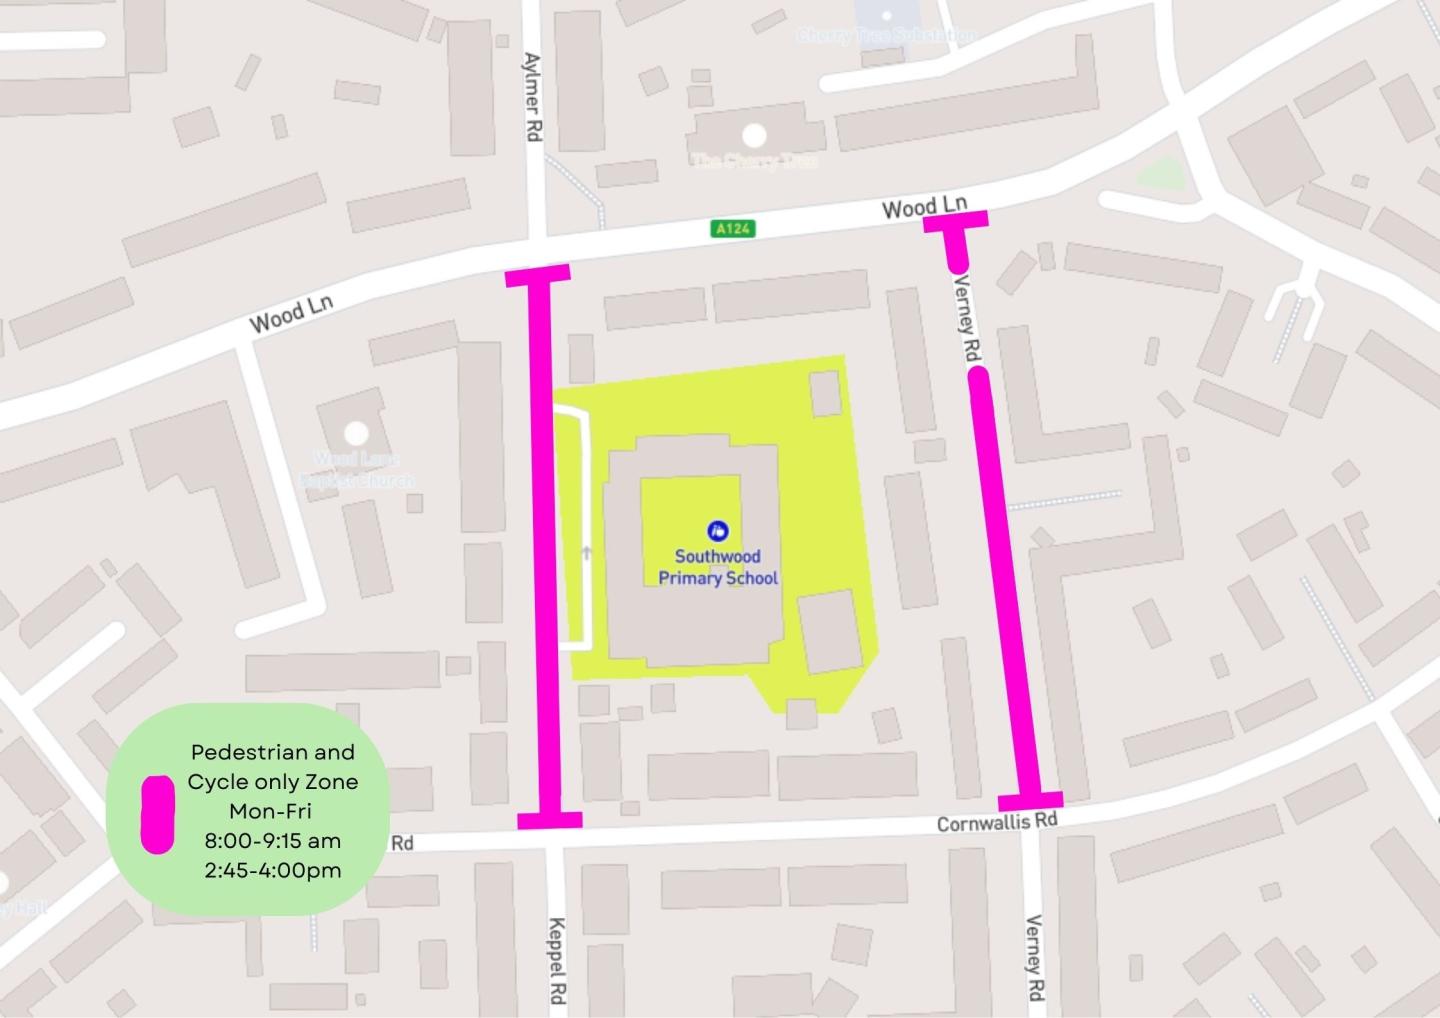 A map showing the location of the School Street for Southwood Primary School